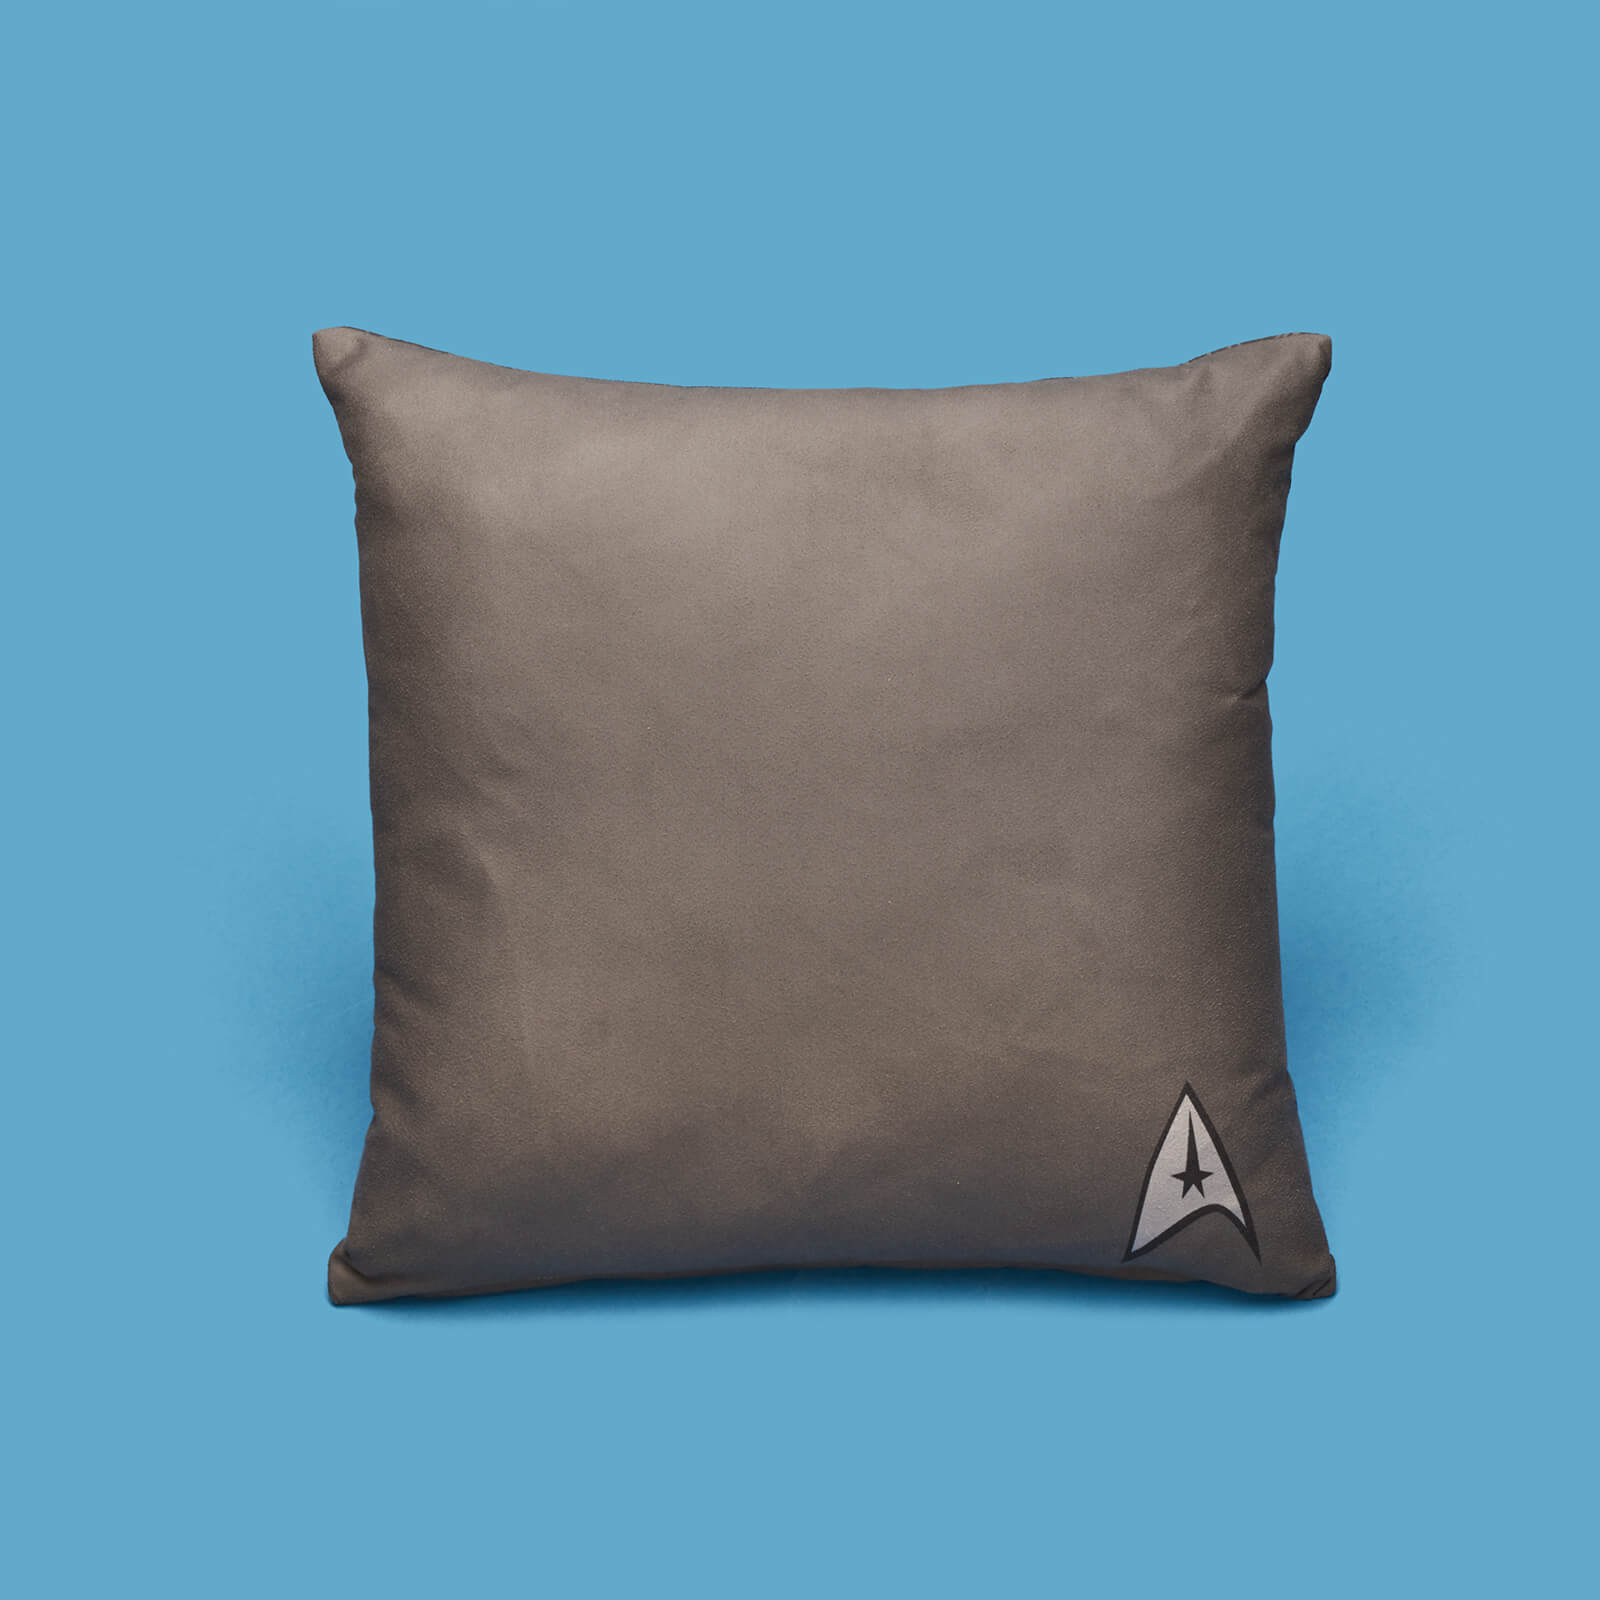 Star Trek Pattern And Logo Square Cushion - 50X50cm - Soft Touch